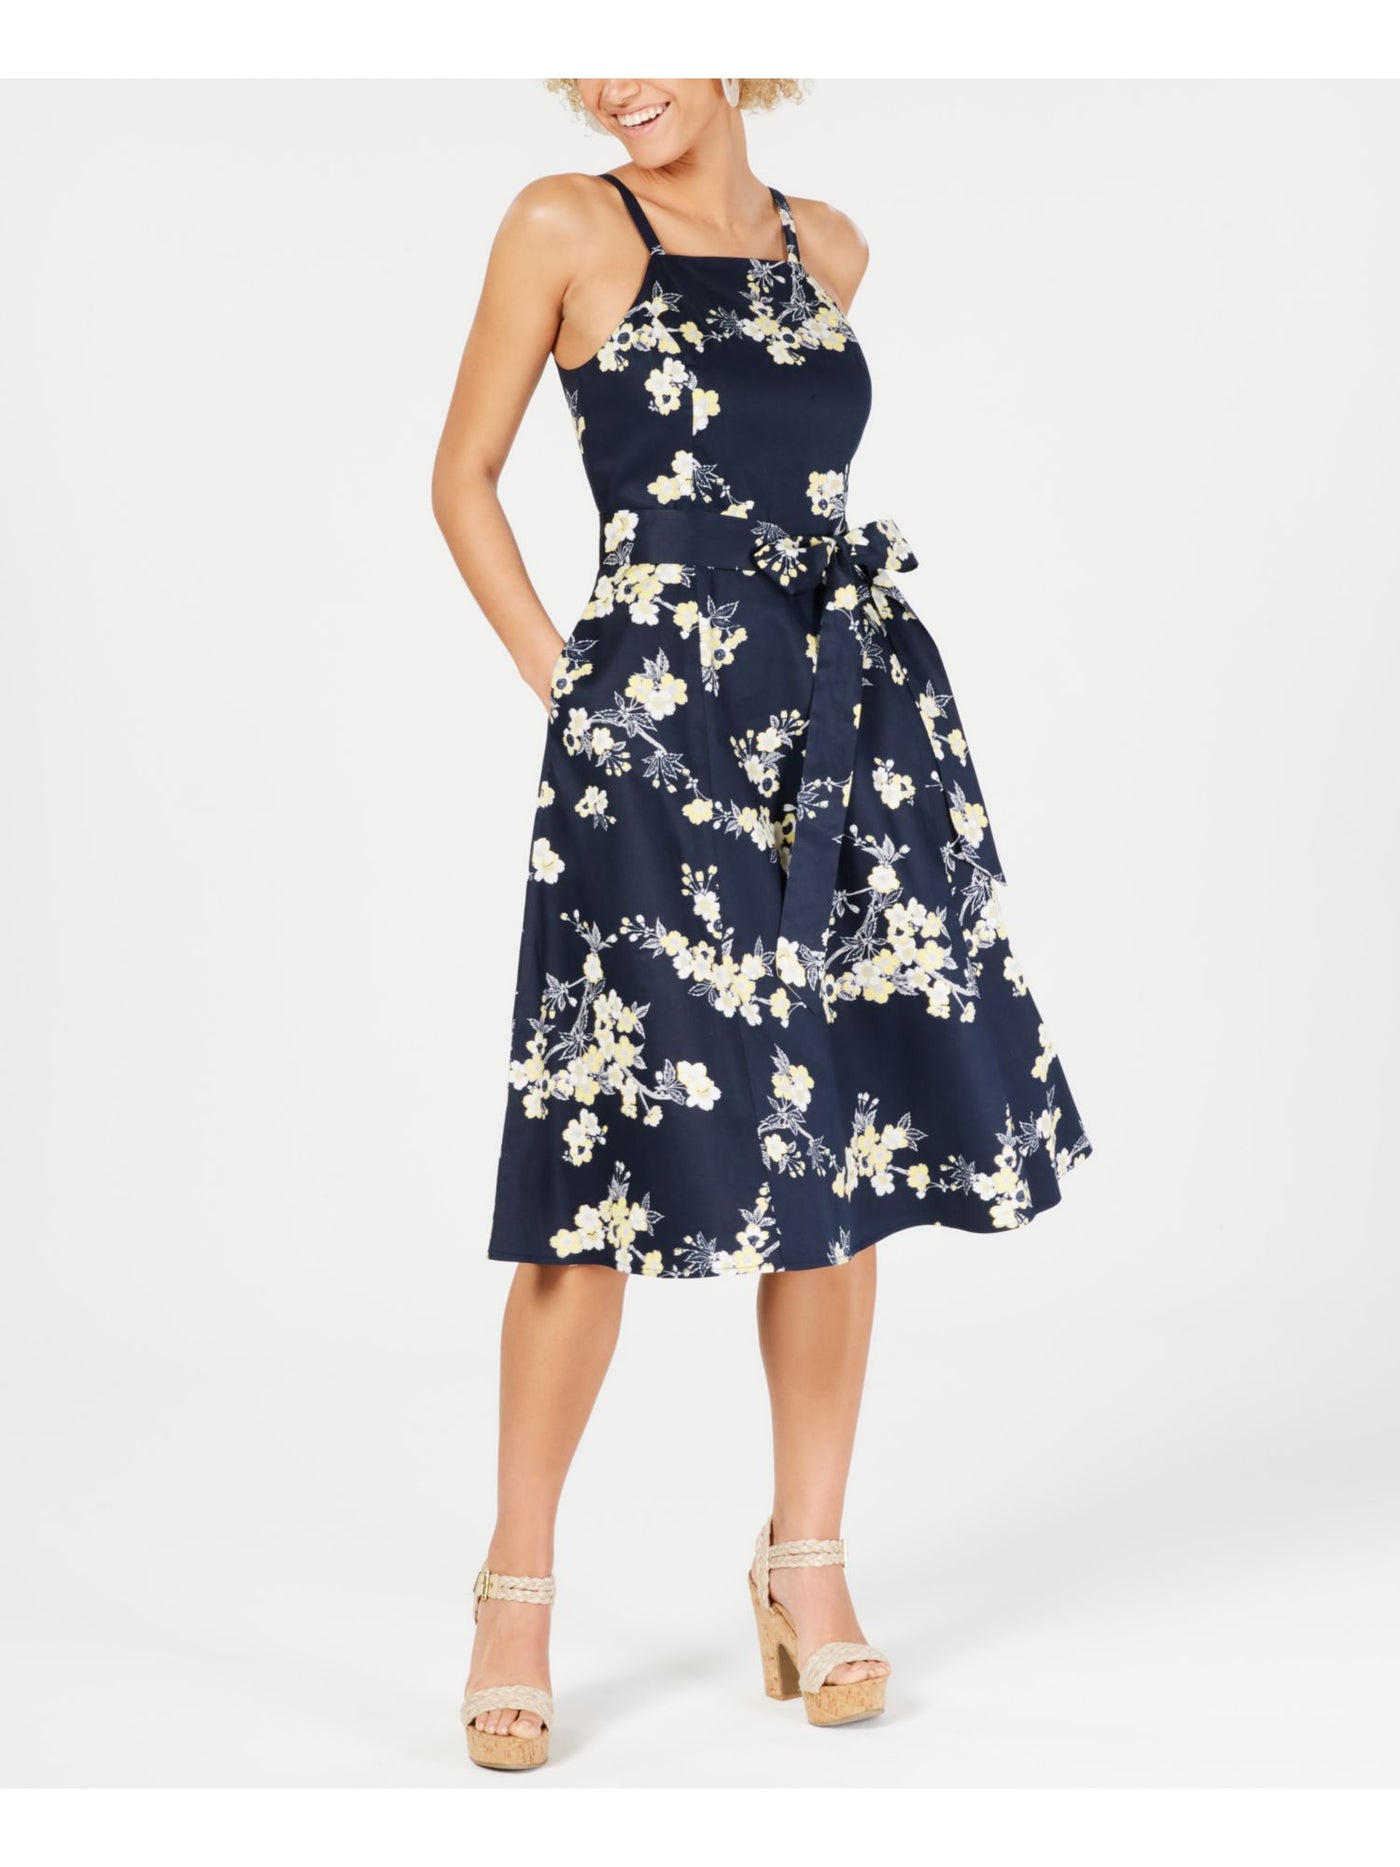 RACHEL ROY Womens Navy Floral Sleeveless Square Neck Midi Formal Fit + Flare Dress 0